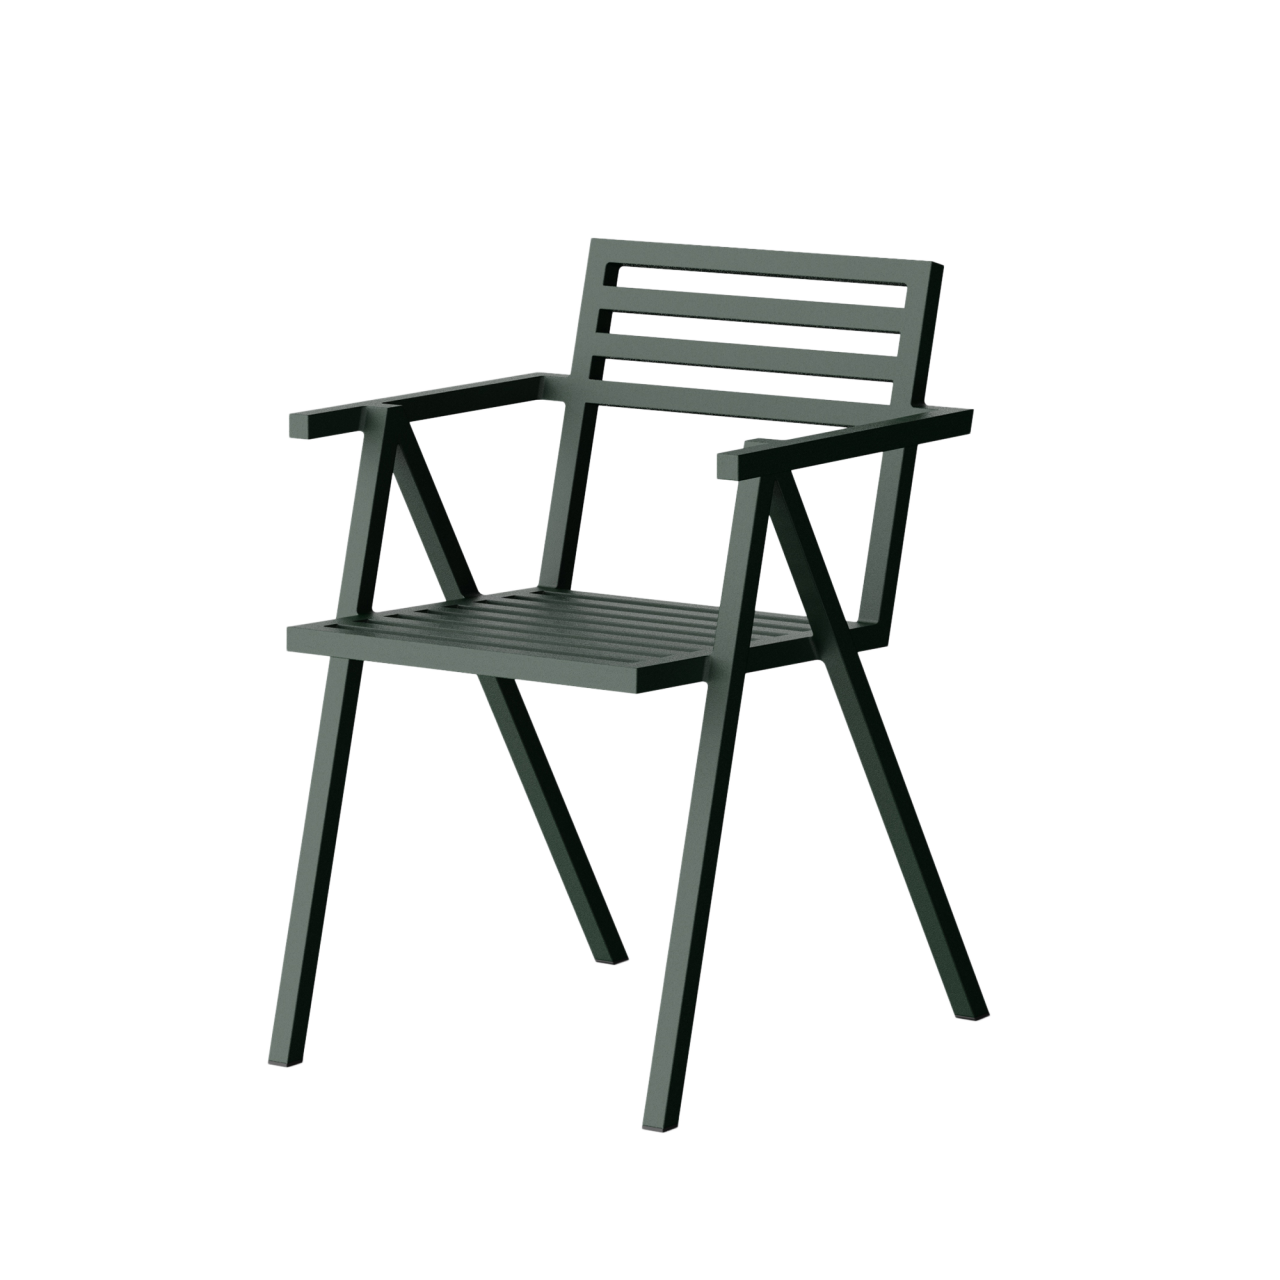 19 Outdoors Stacking Arm Chair Stuhl